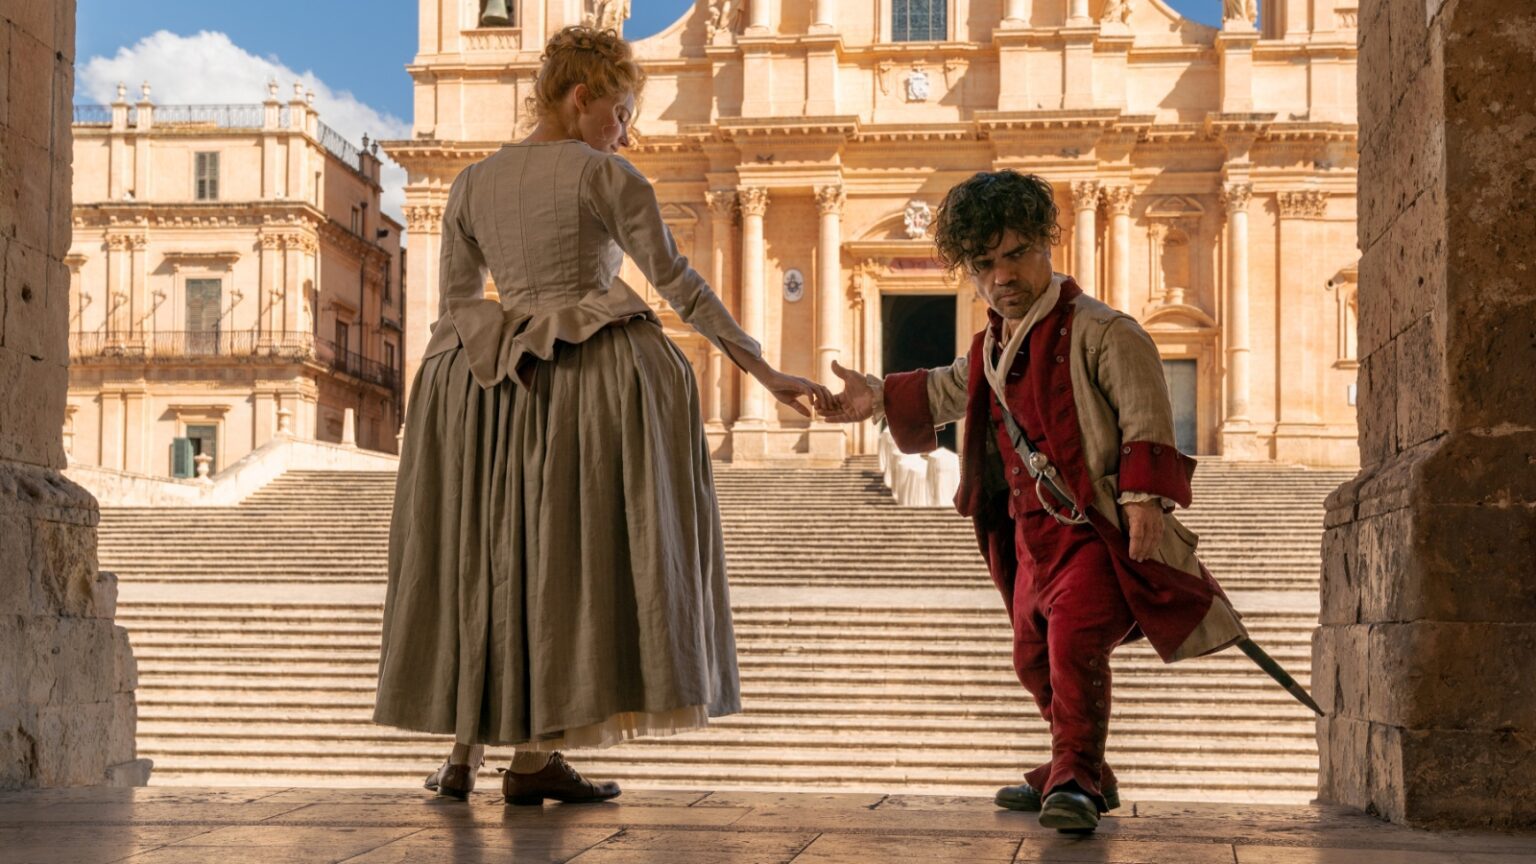 Haley Bennett stars as Roxanne and Peter Dinklage plays the titular role of Cyrano de Bergerac in the romantic musical "Cyrano